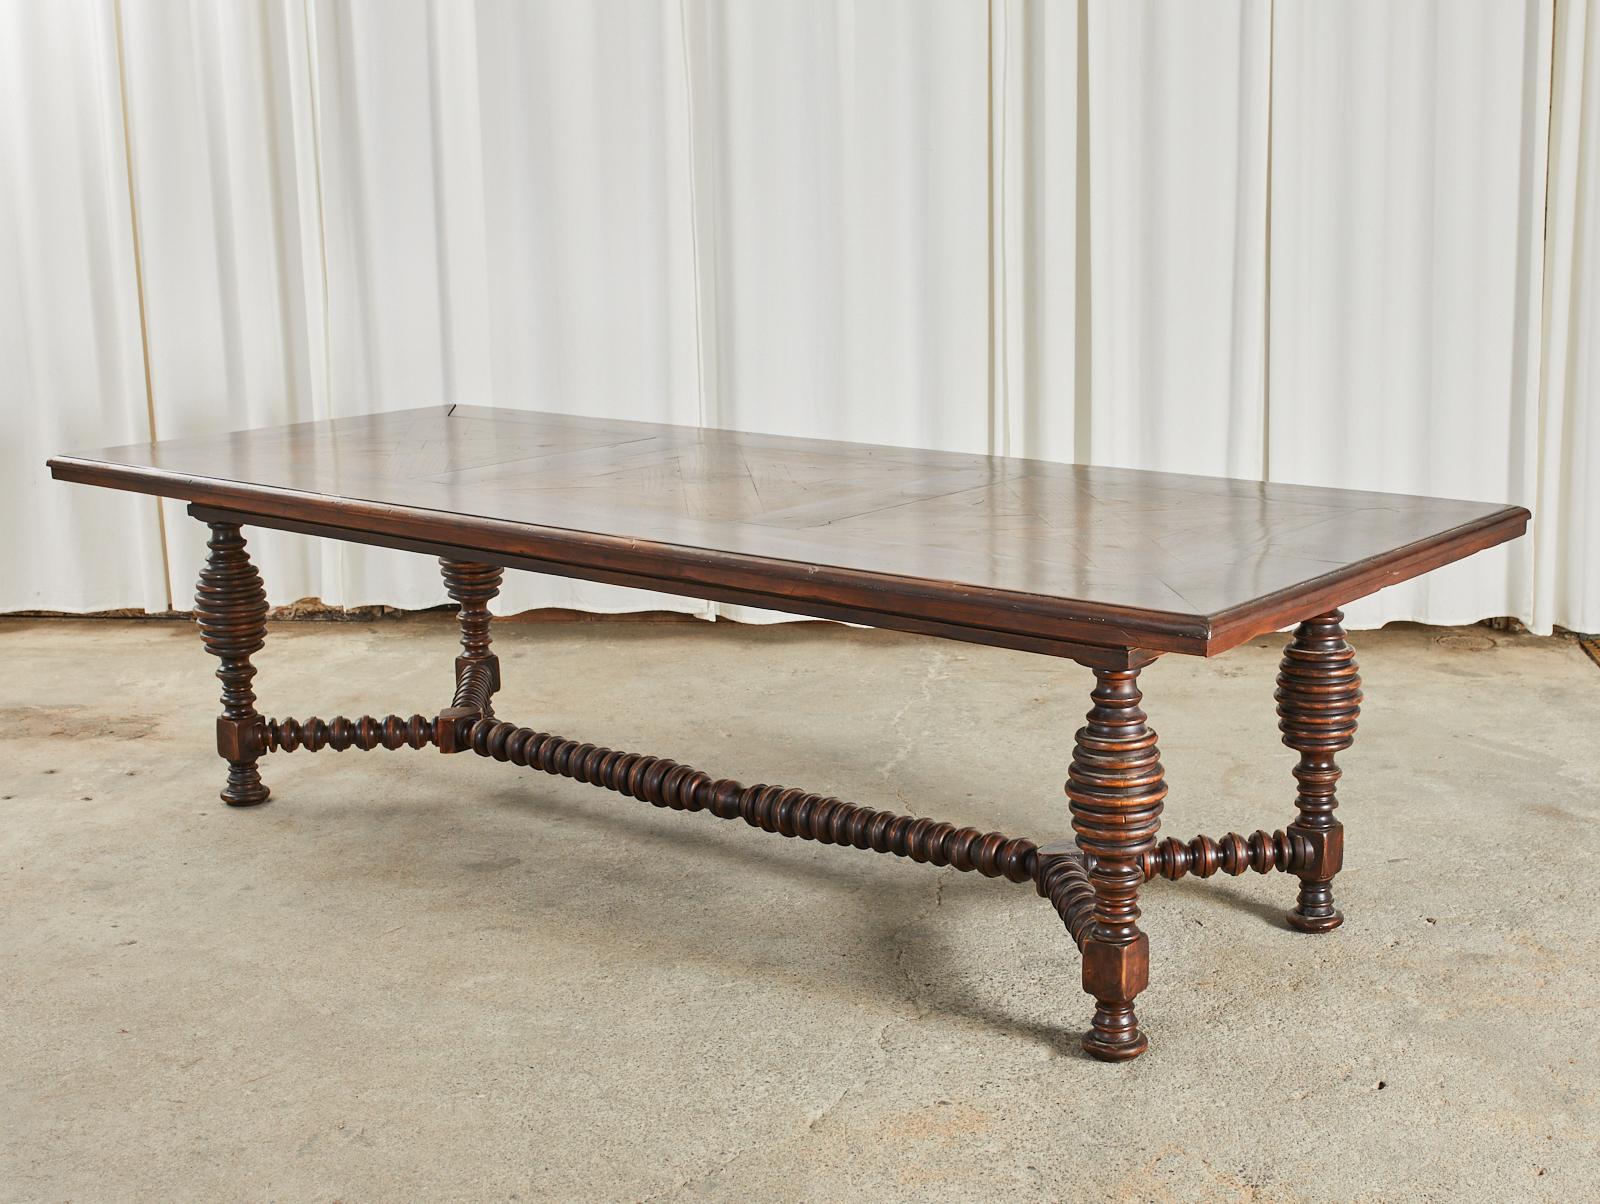 Portuguese Baroque Style Dining Table with Parquetry Inlay In Distressed Condition In Rio Vista, CA